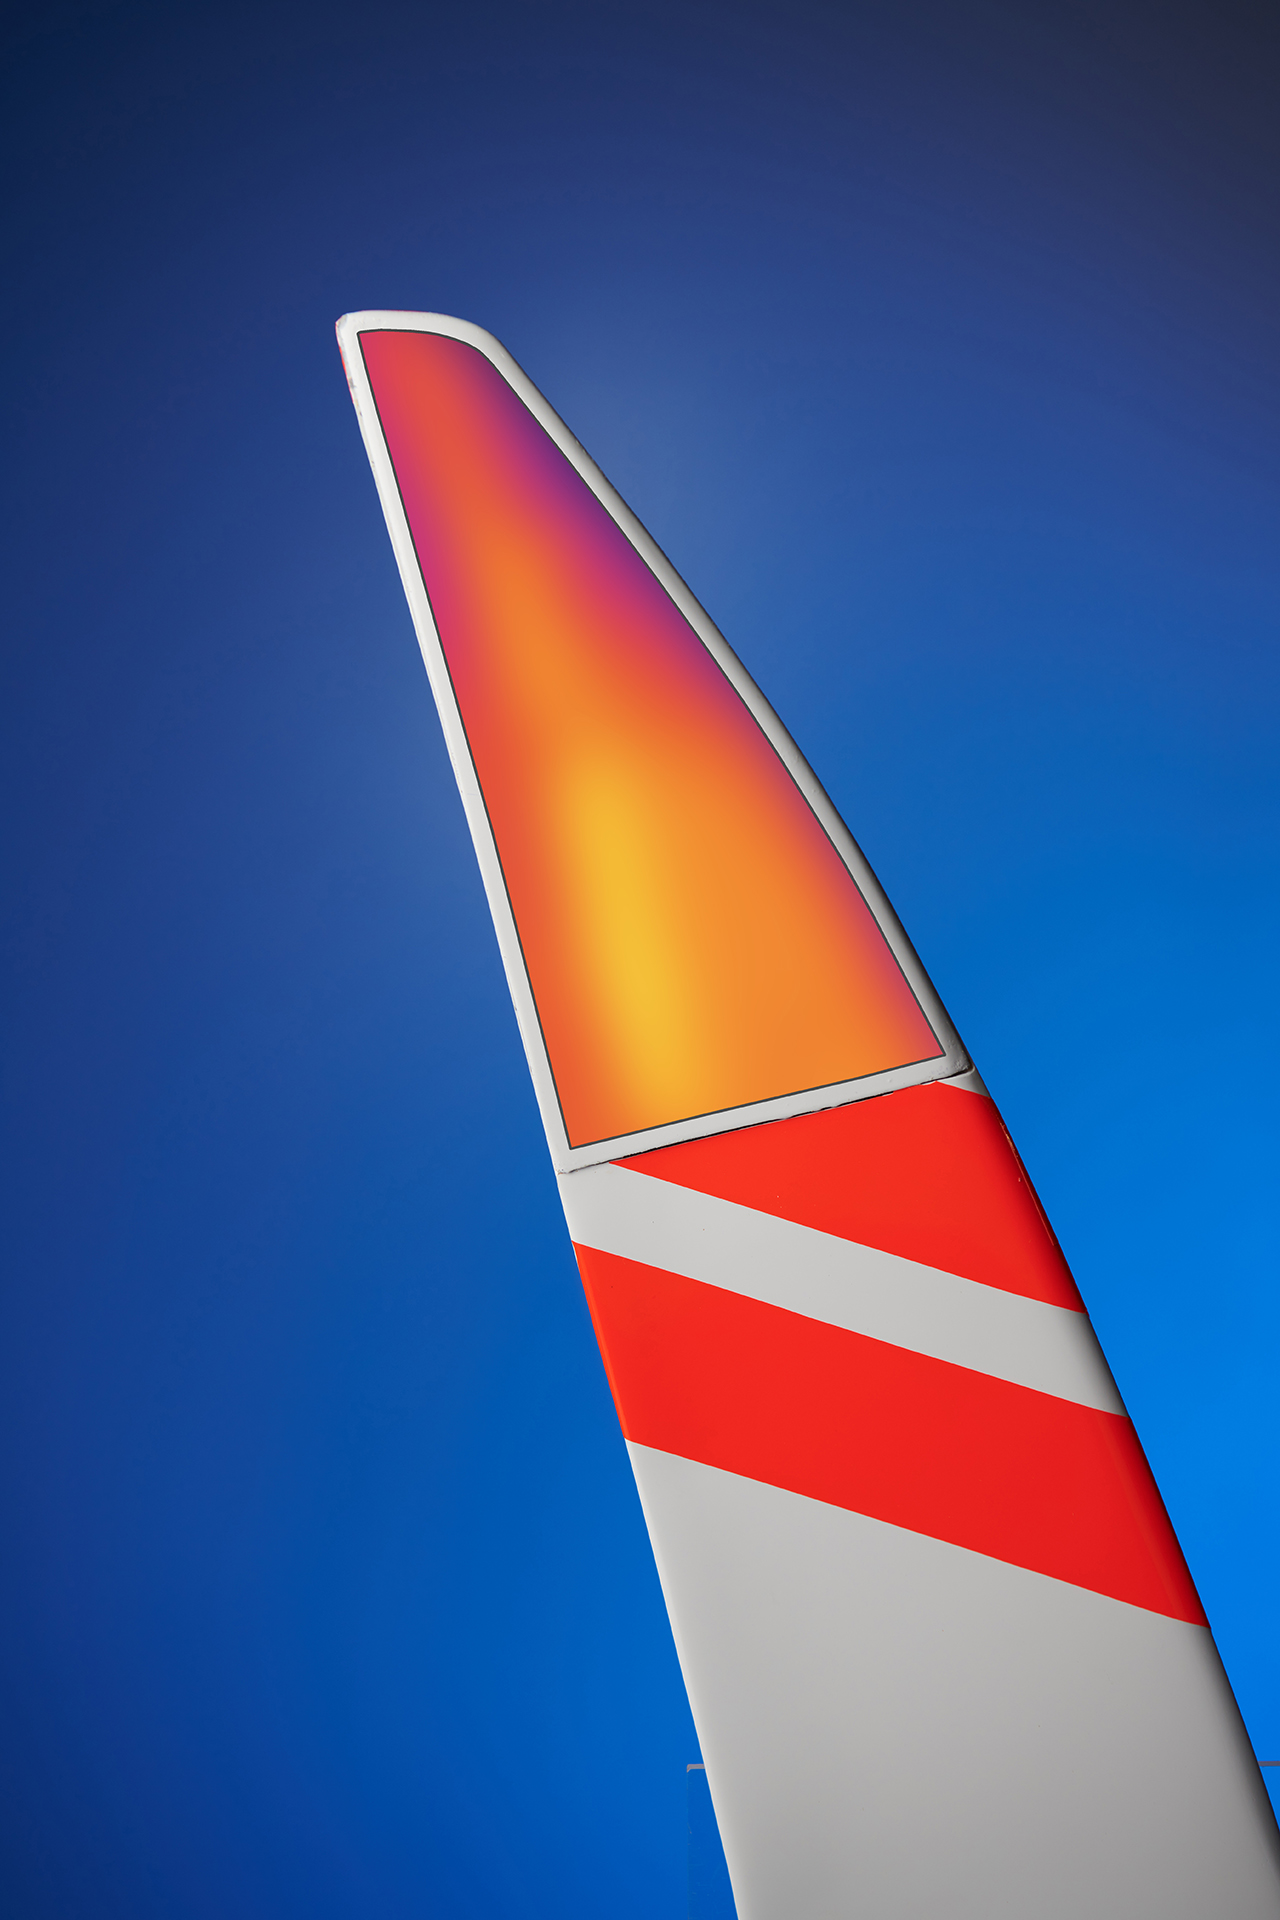 By means of this photo montage, the heated surface of an airplane wing can be illustrated. The upper colored part symbolizes a false-color image taken with a thermographic camera.